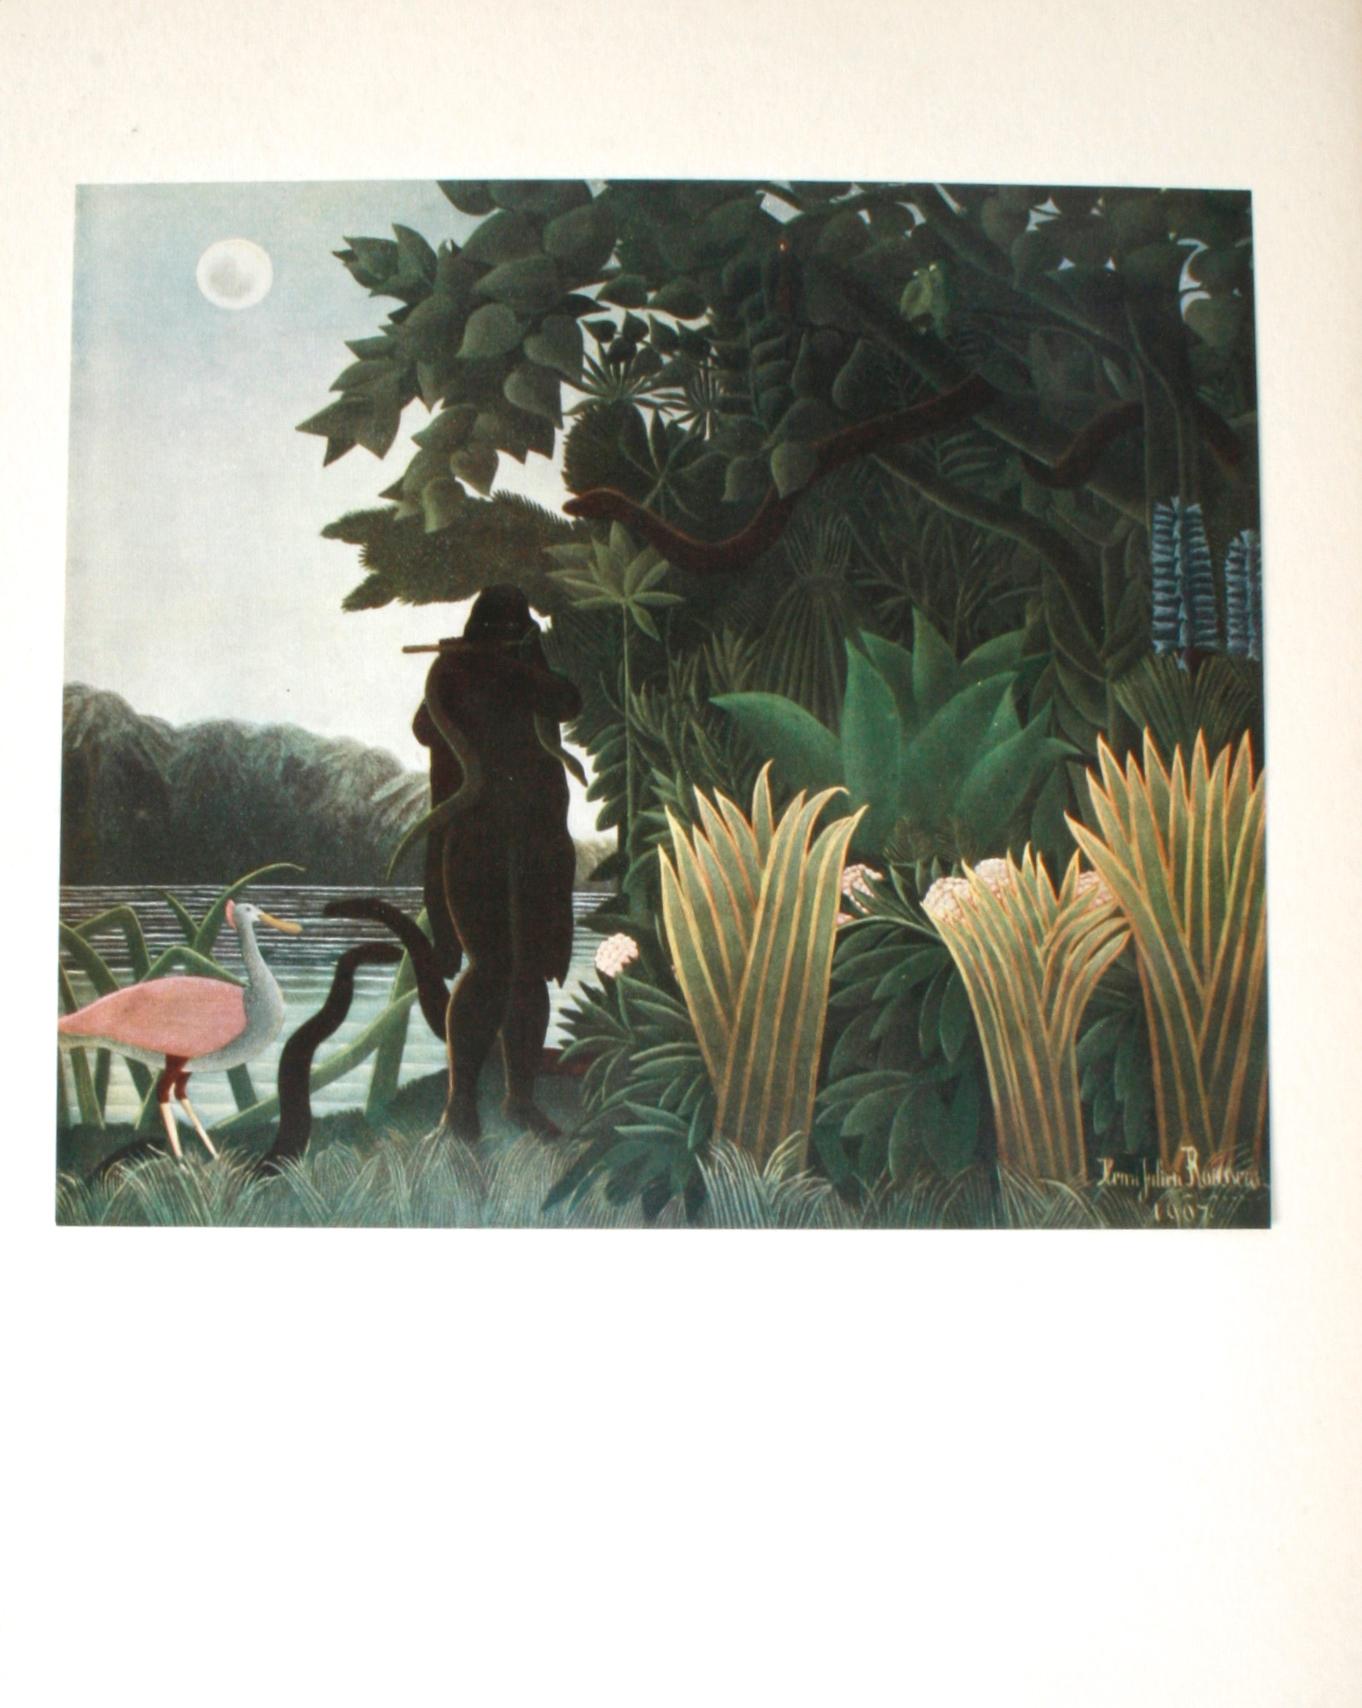 English Henri Rousseau dit Le Douanier by Jean-Marie Lo Duca, First Edition For Sale